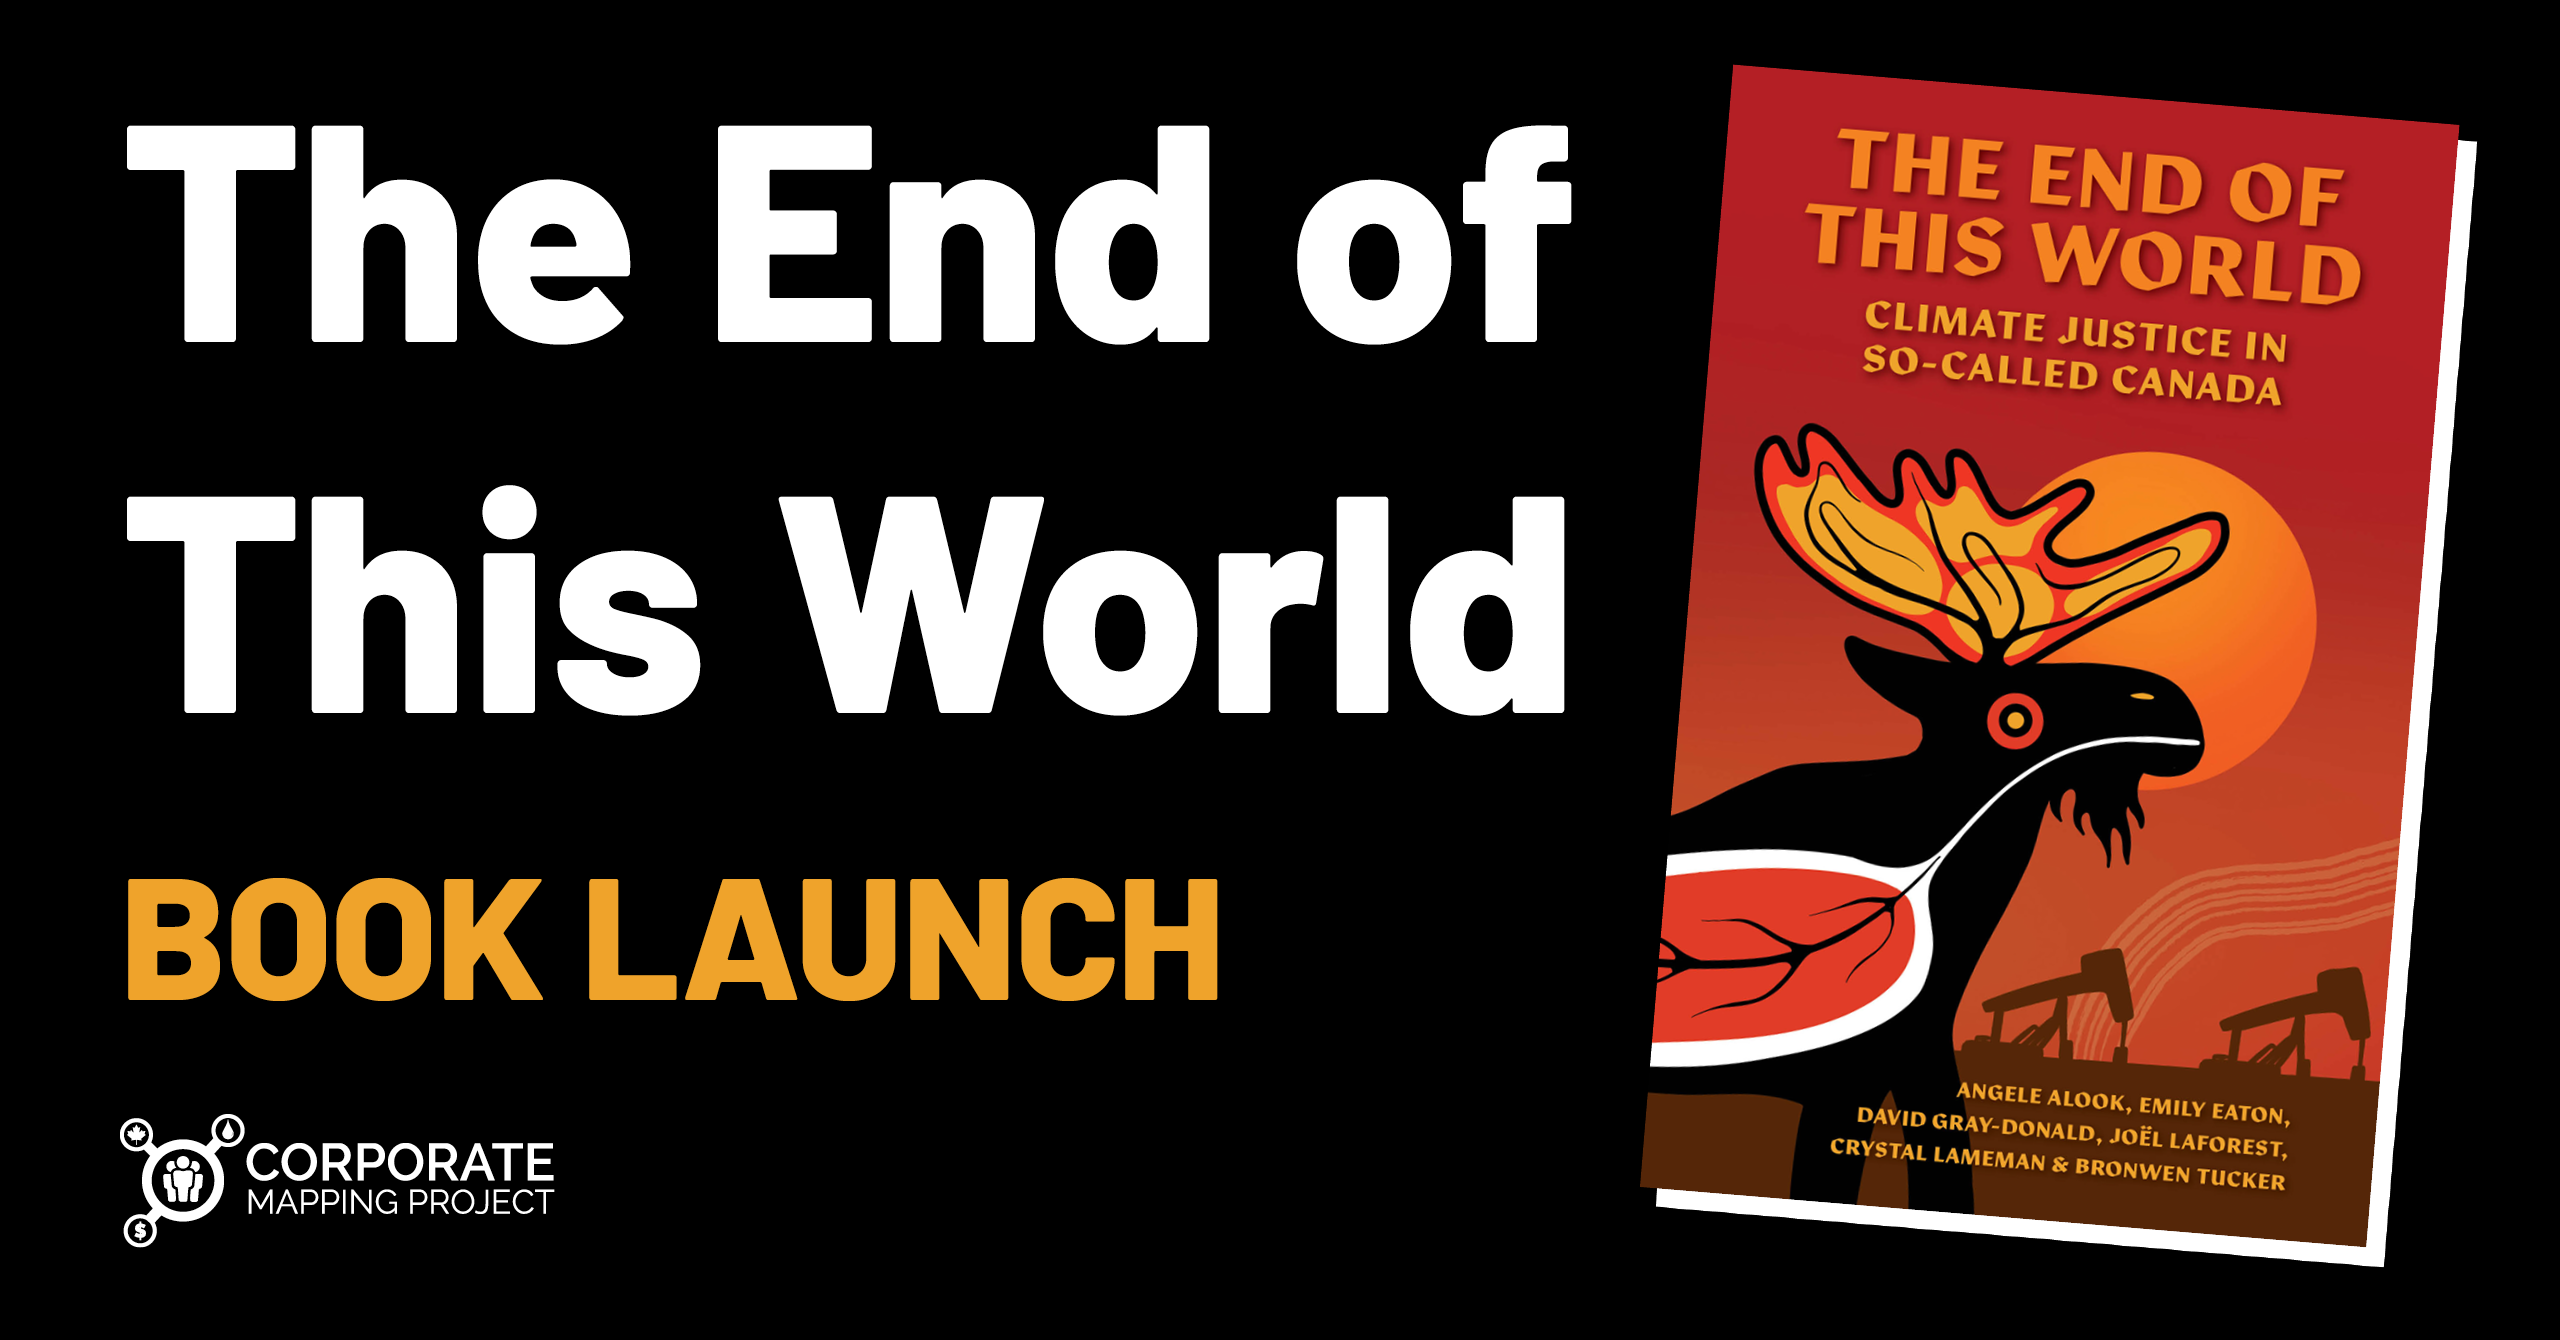 The End of This World Book Launch